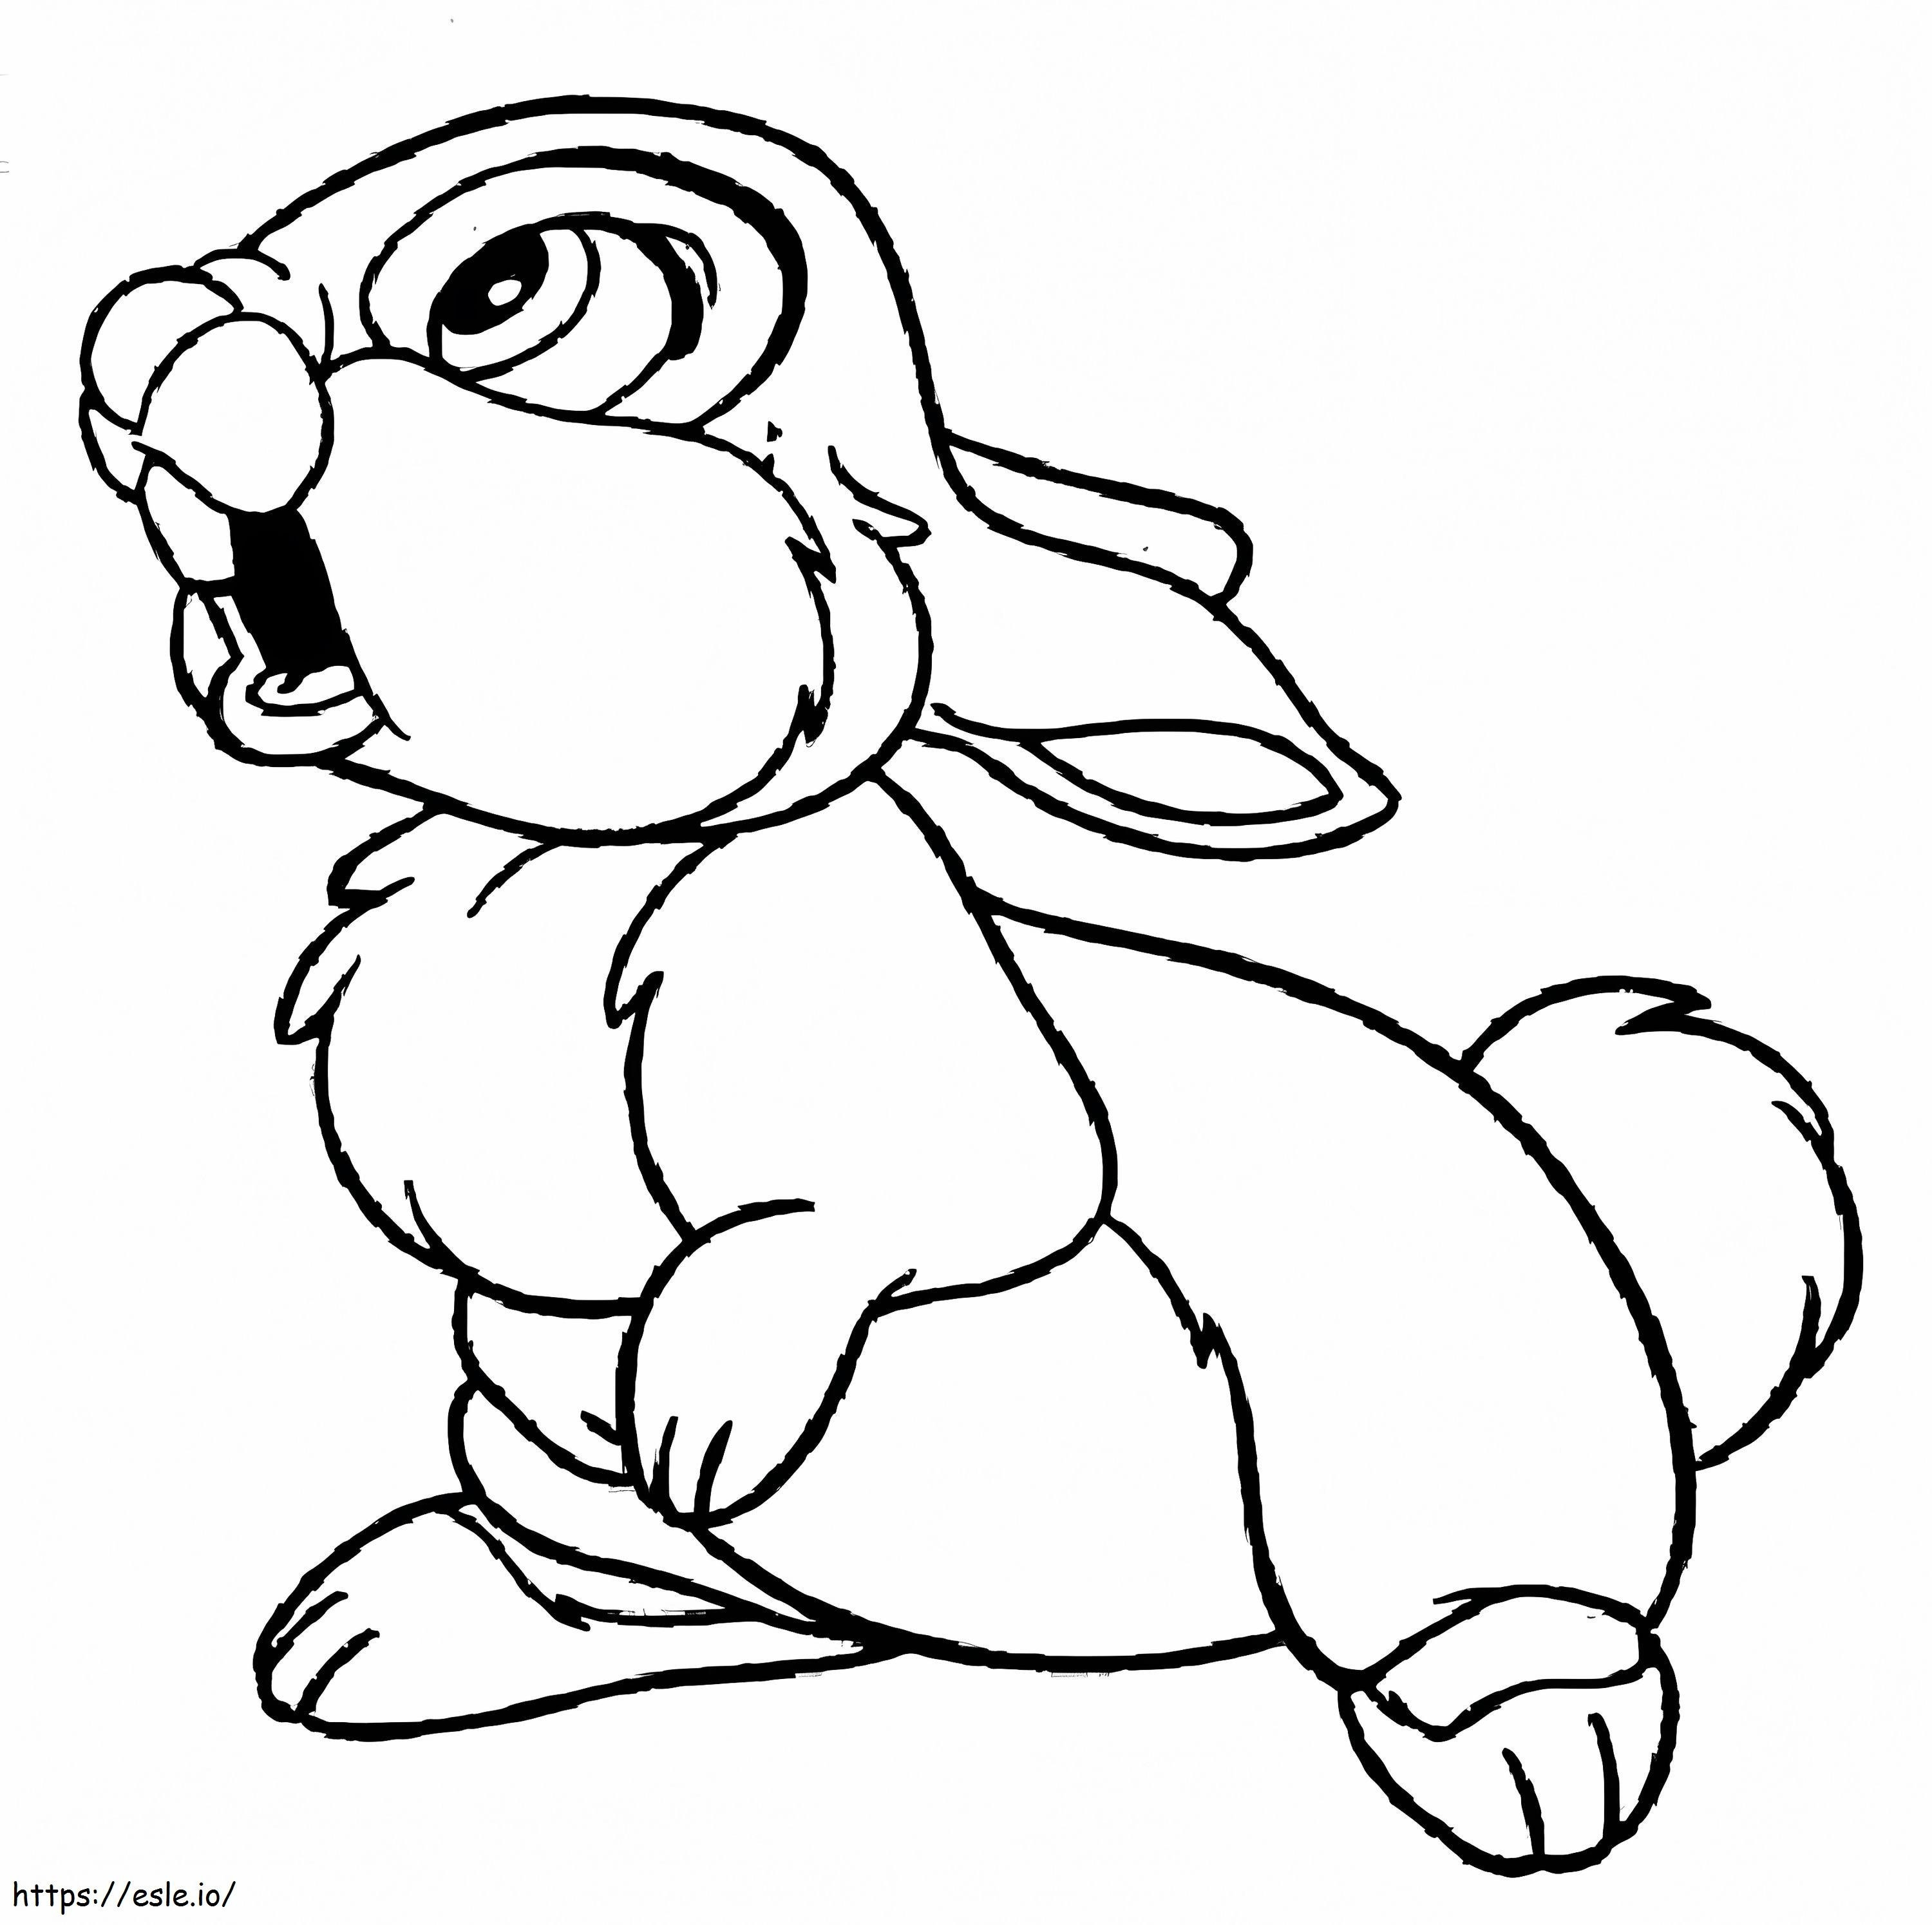 Free Printable Thumper coloring page